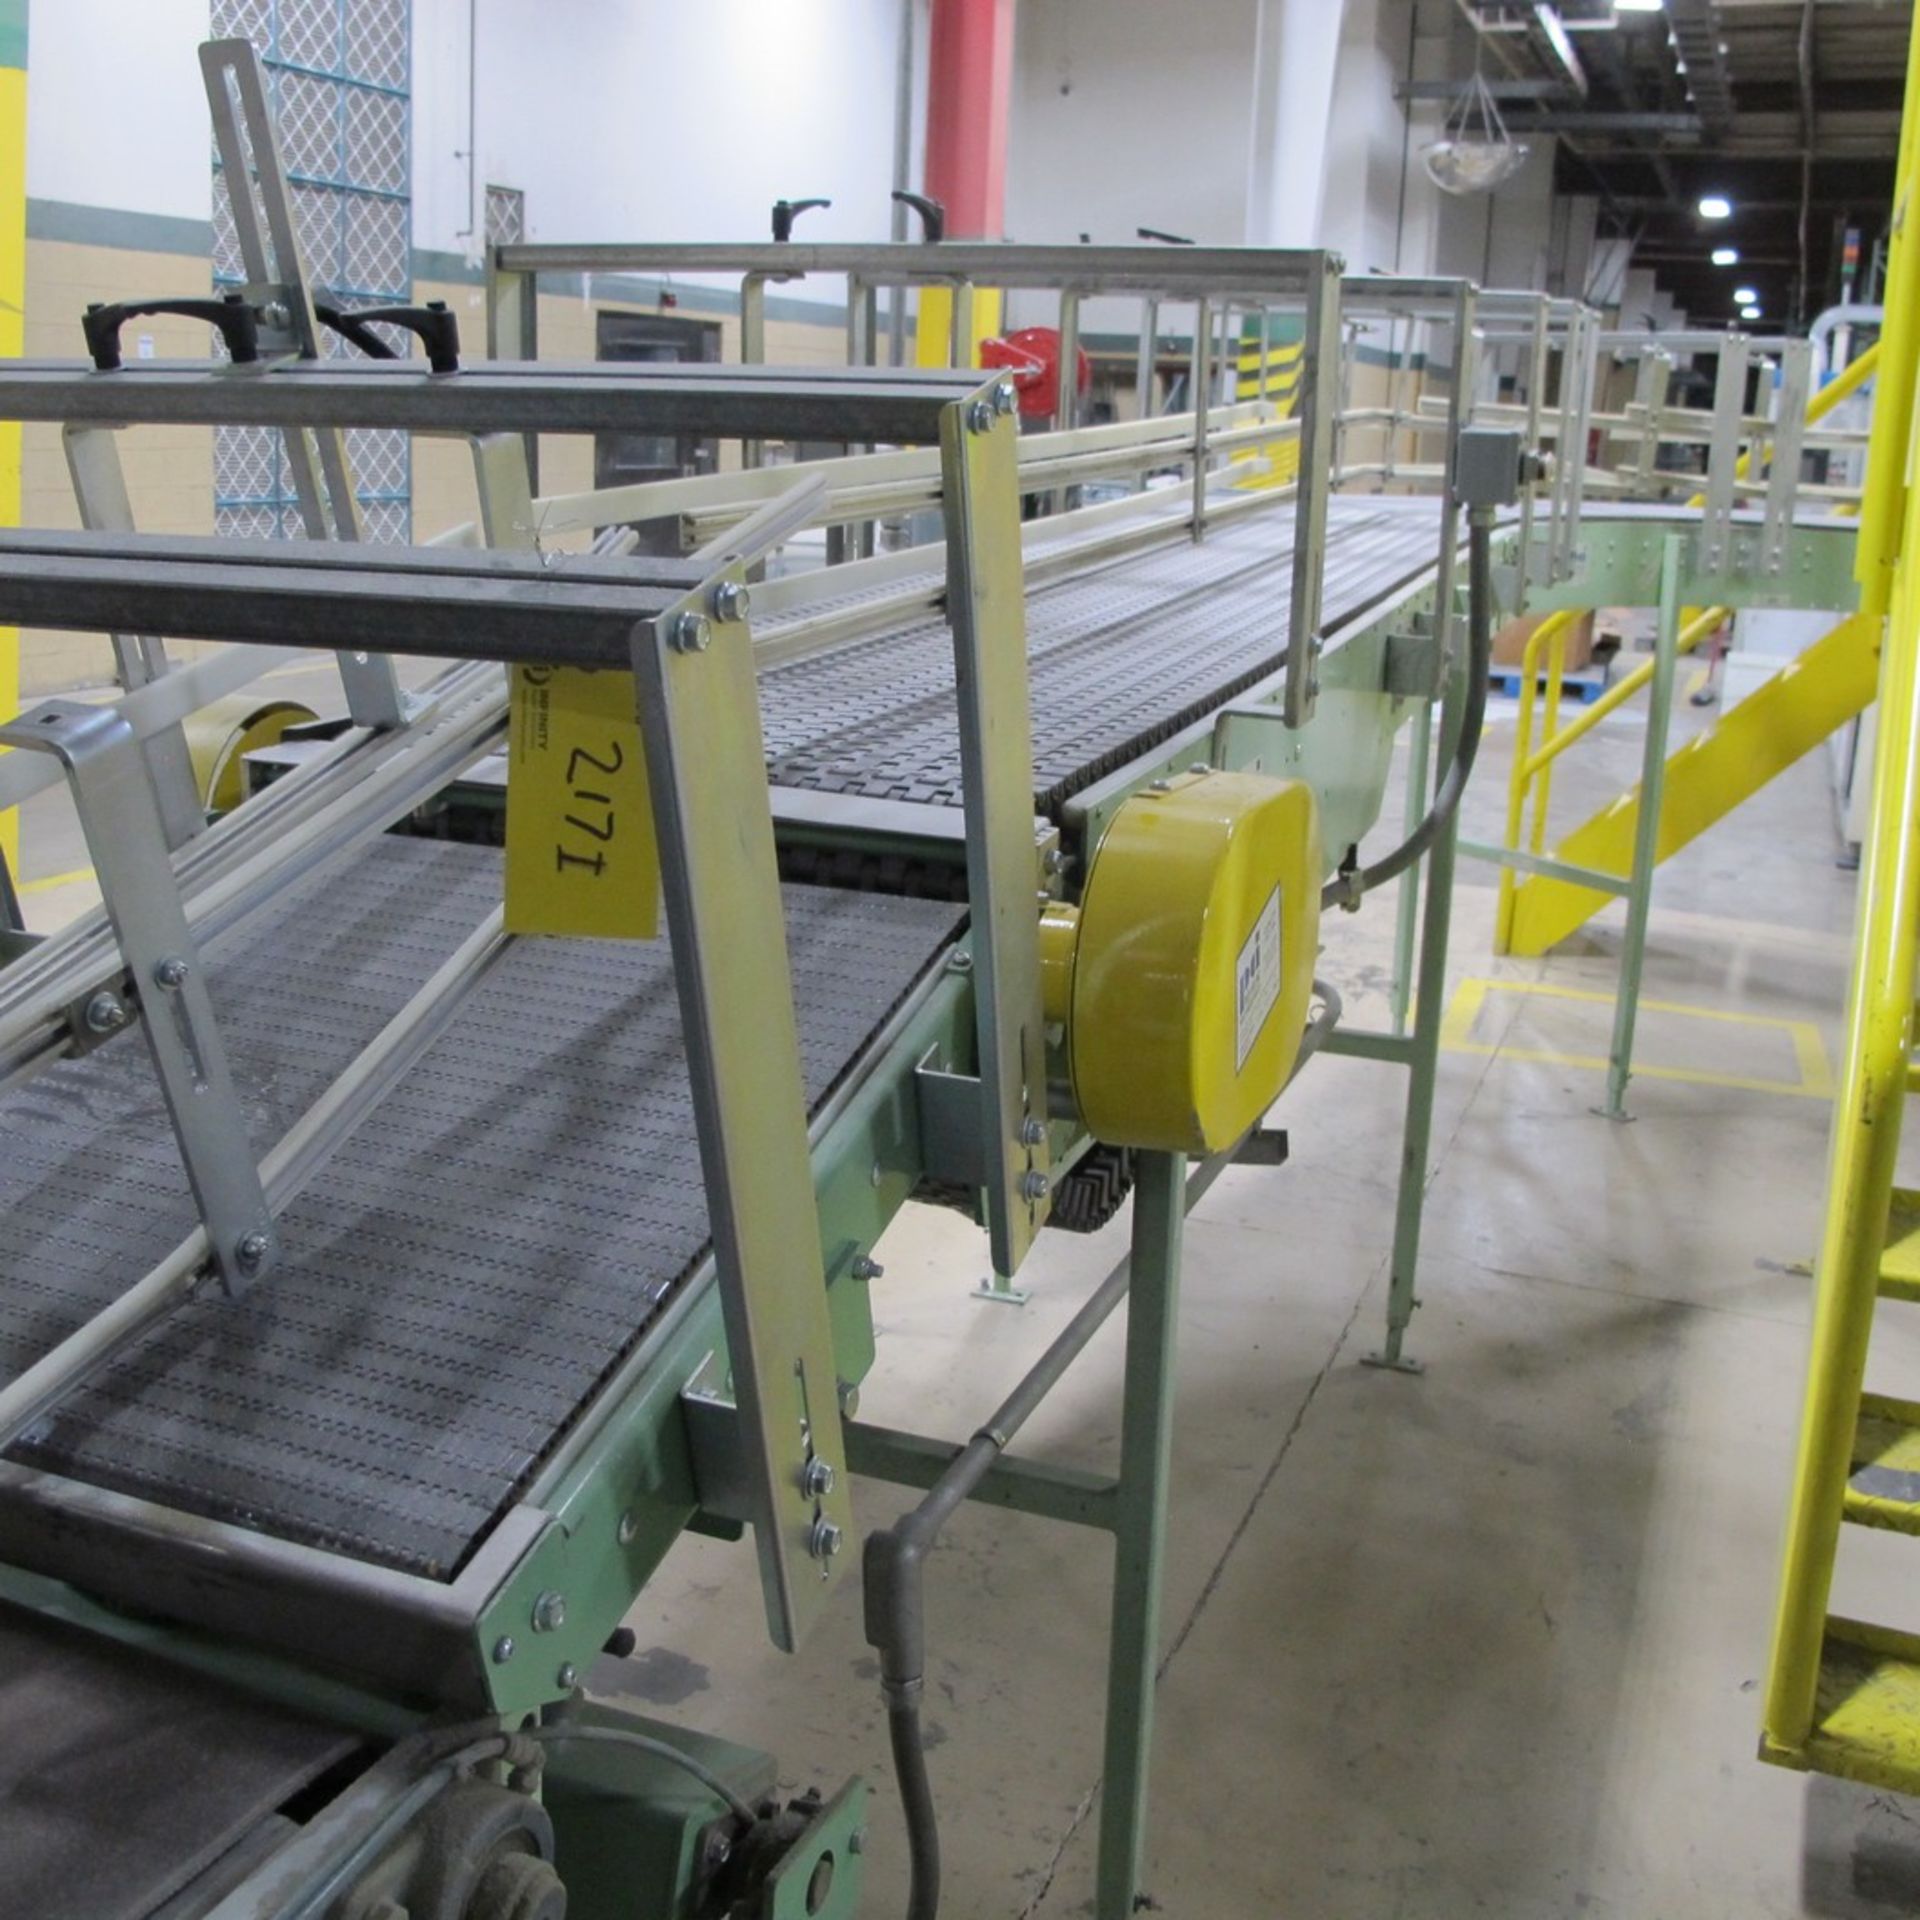 PACK AIR INC. APPROX. 20'L X 24"W POWERED BELT CONVEYOR, 2-LANES W/ CONTROLS (TOWEL T3) - Image 2 of 2